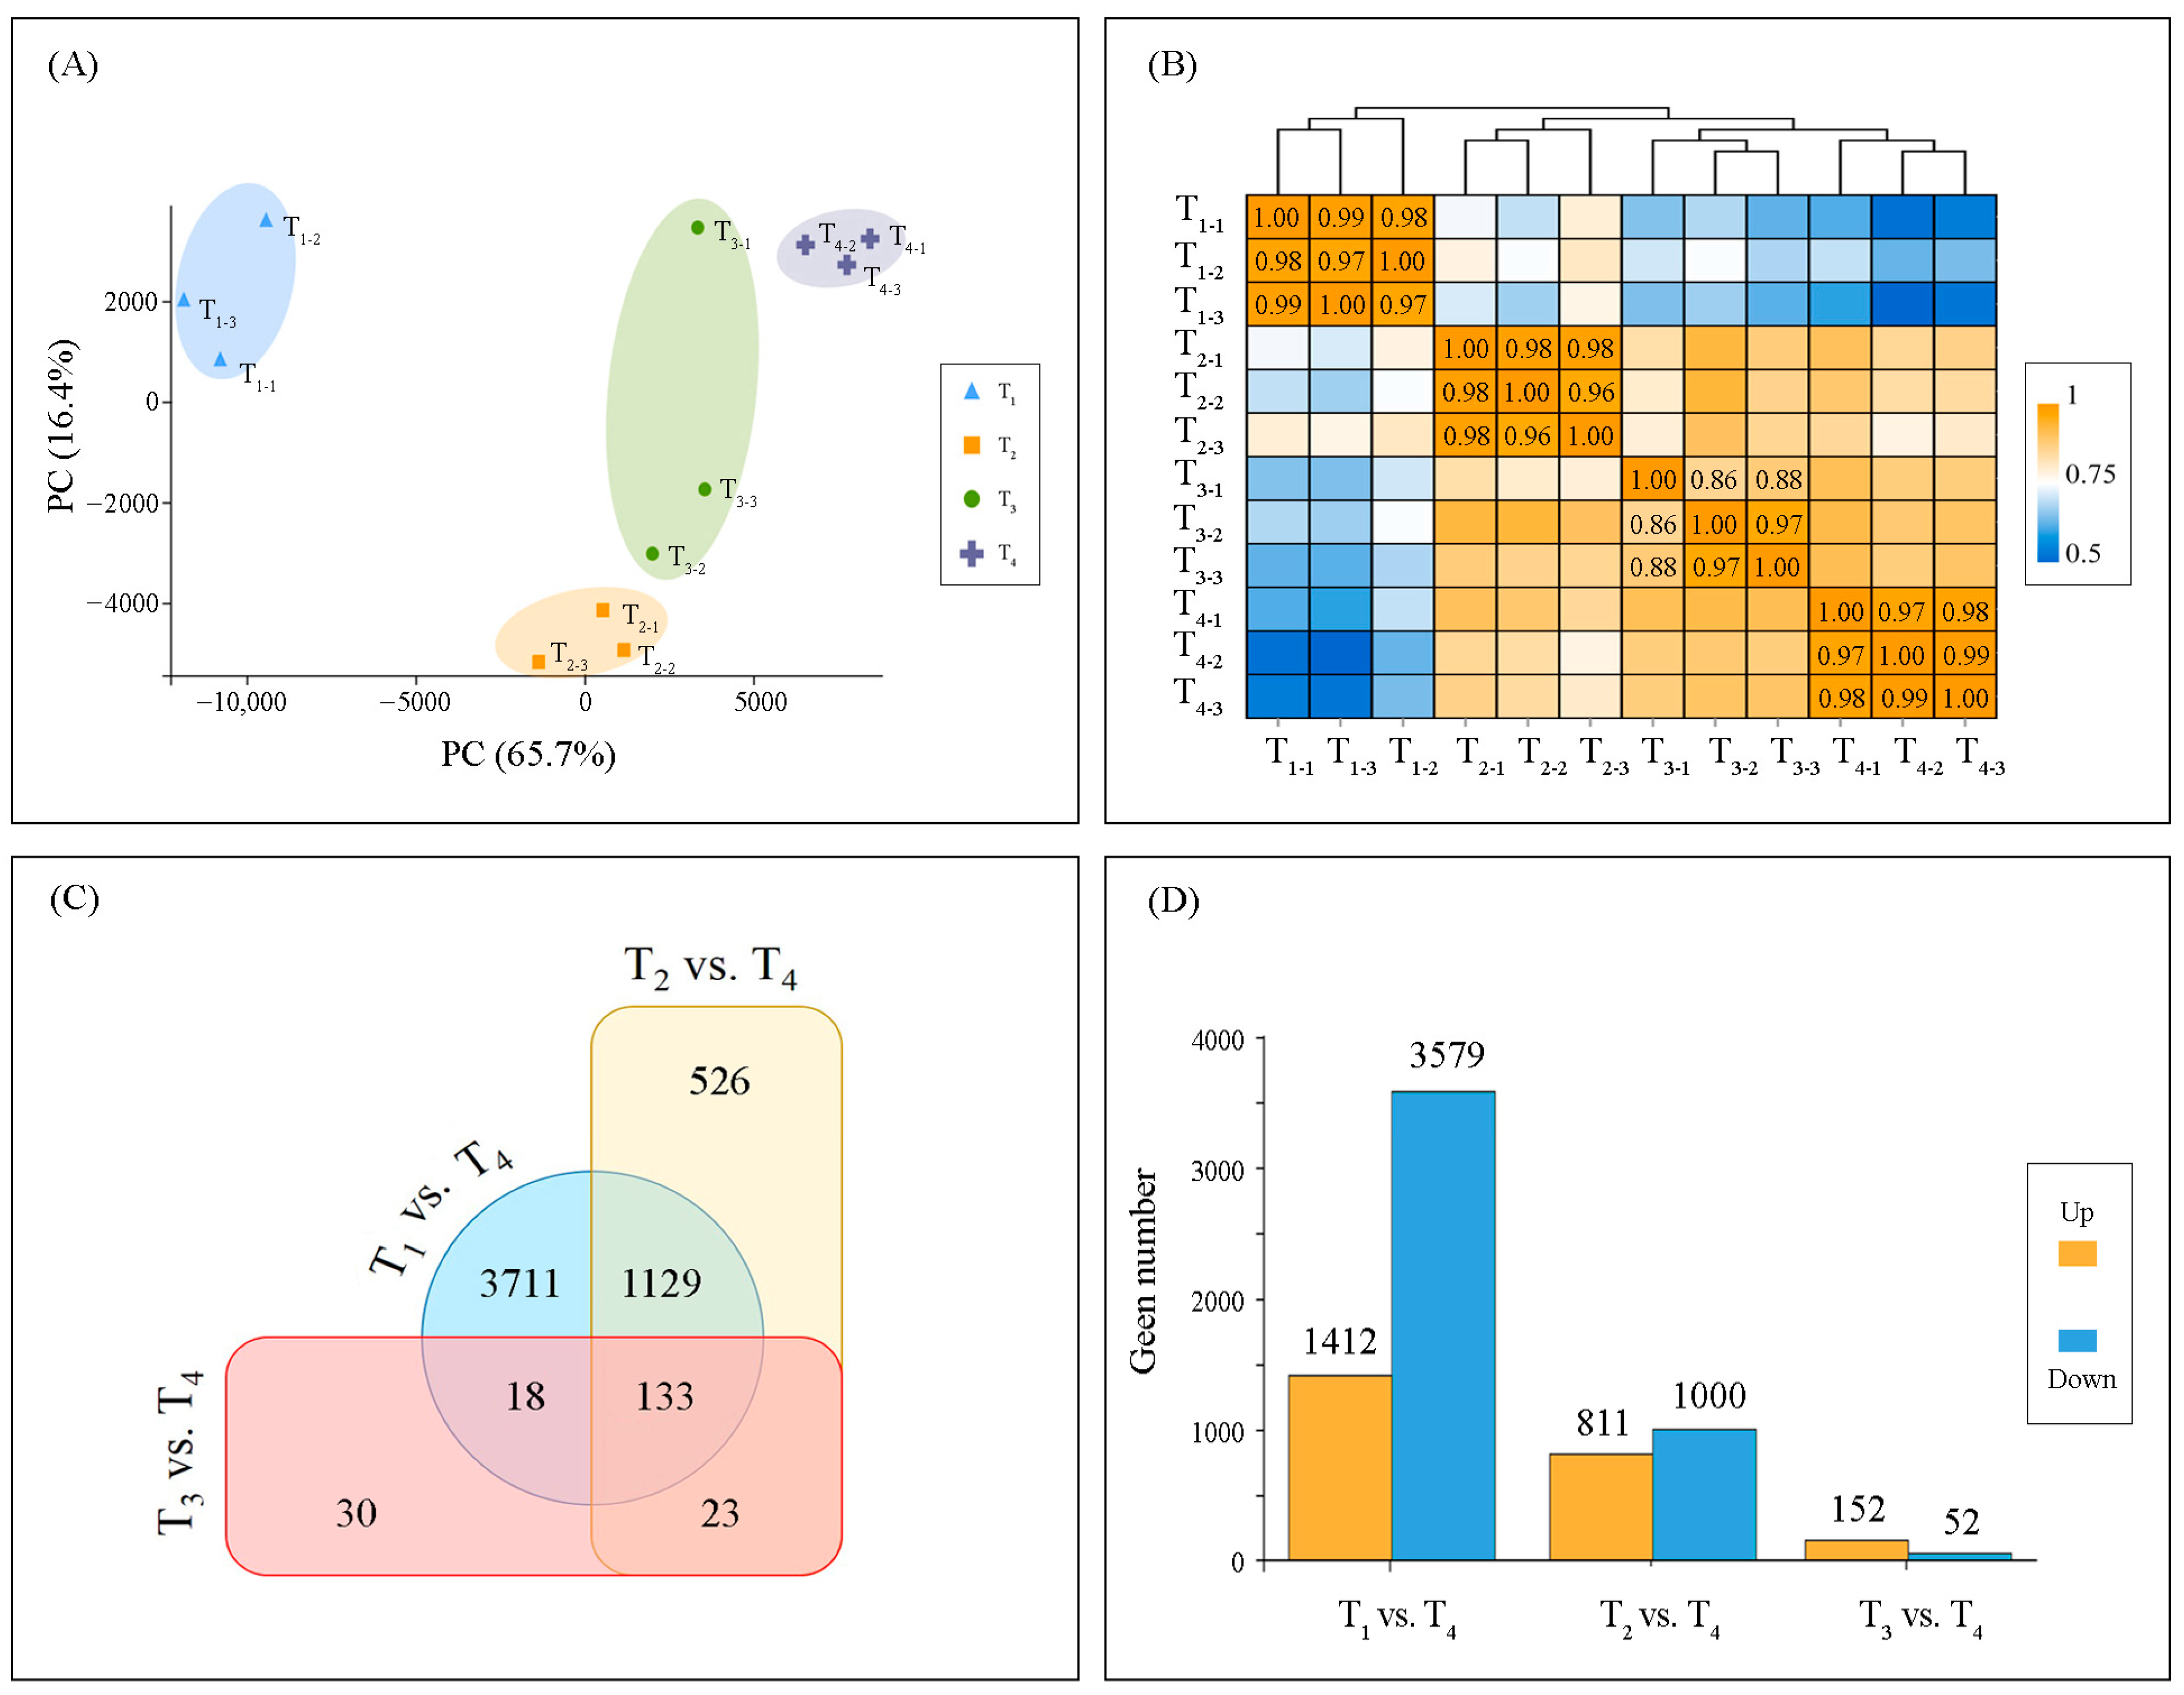 IJMS | Free Full-Text | Metabolome and Transcriptome Analyses Reveal the  Regulatory Mechanisms of Photosynthesis in Developing Ginkgo biloba Leaves  | HTML